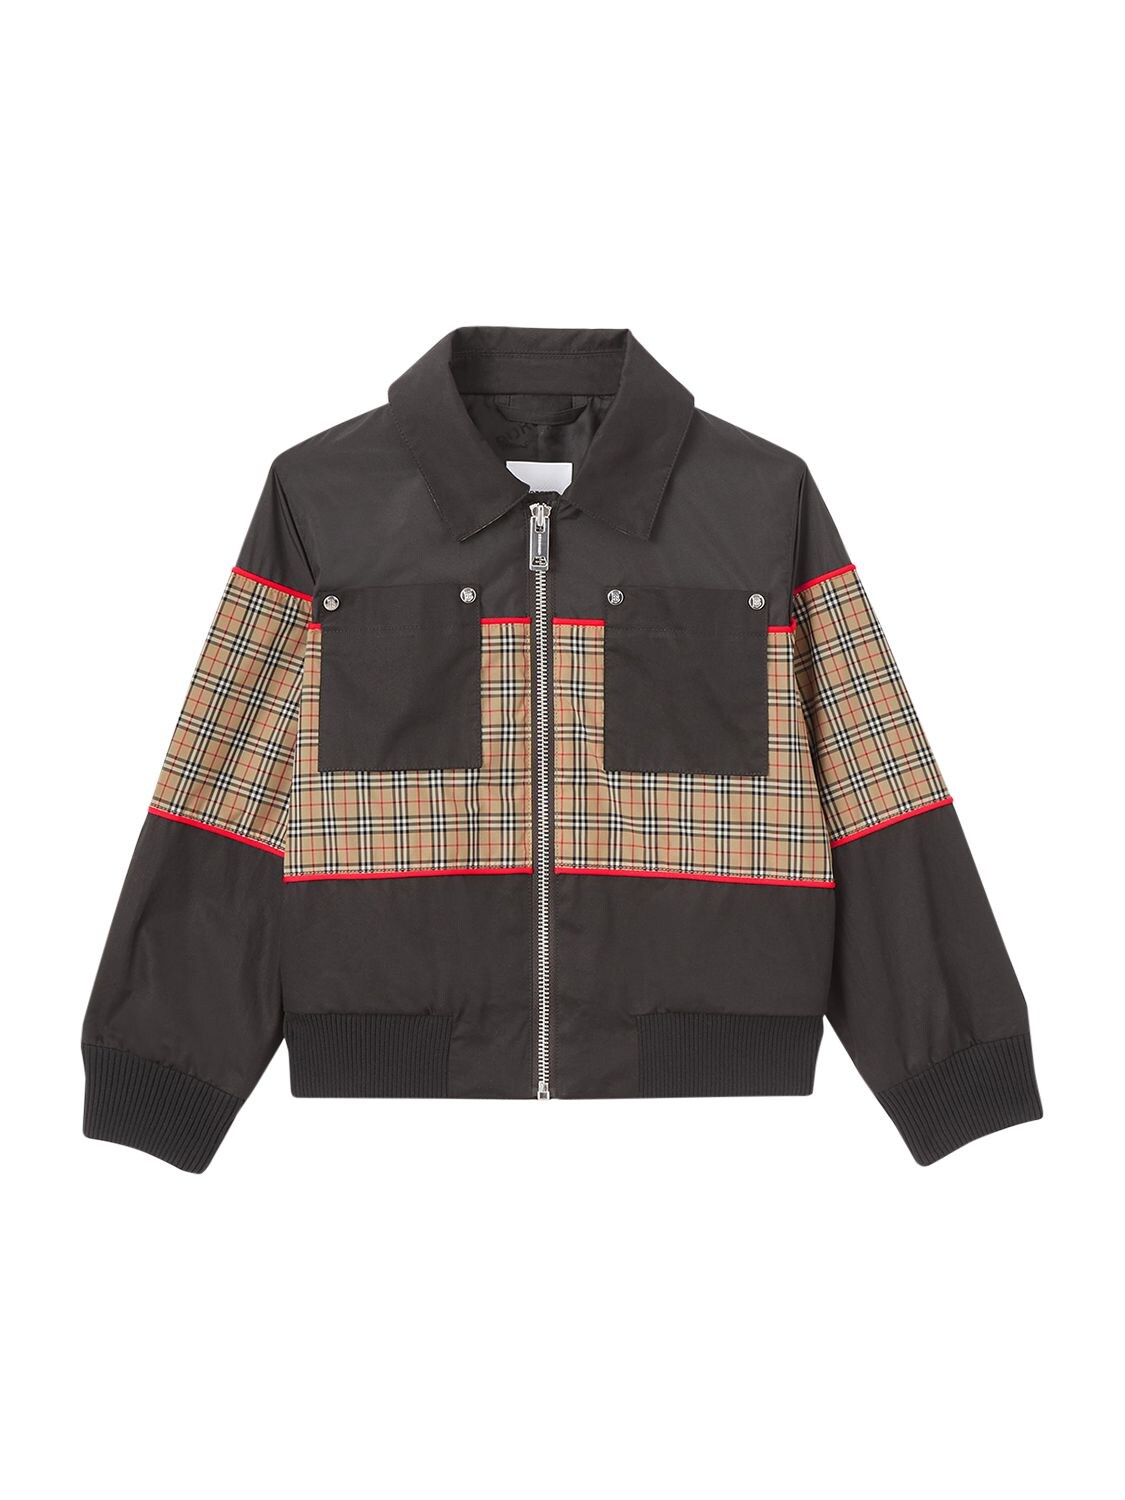 BURBERRY BOMBER JACKET W/ CHECK INSERTS